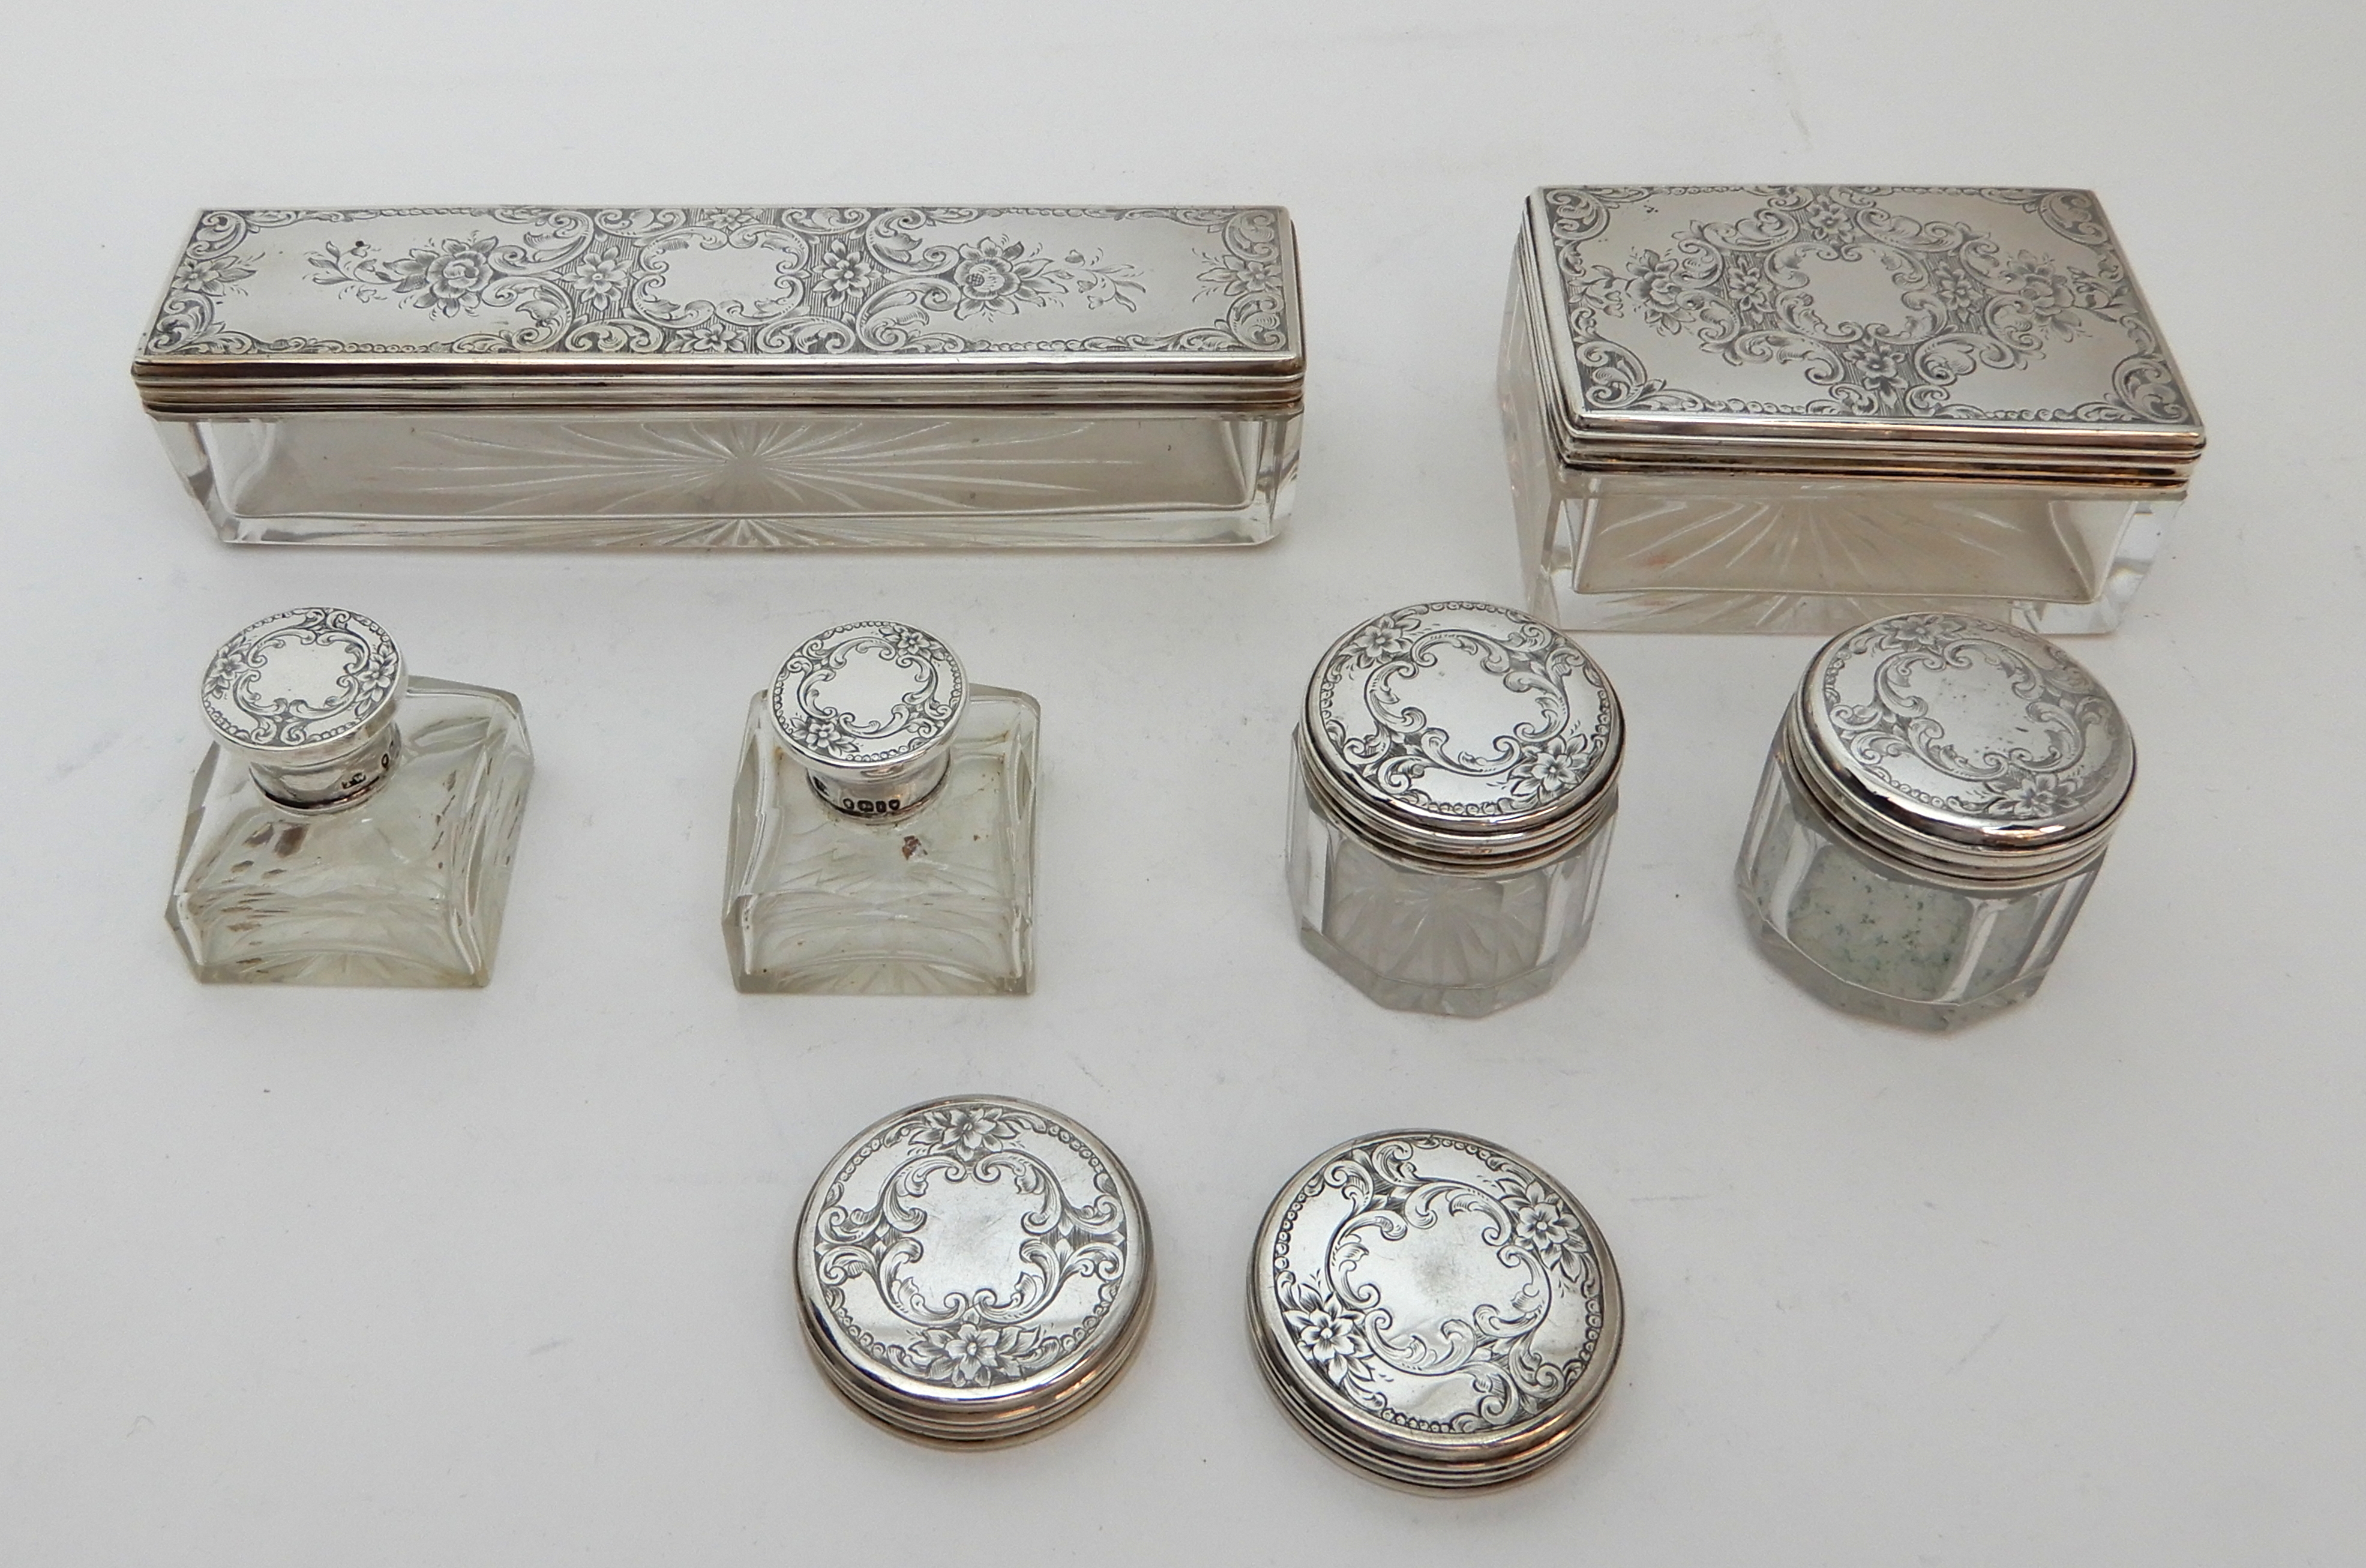 A VICTORIAN COROMANDEL TOILET BOX the interior fitted with silver topped jars and bottles by - Image 6 of 14